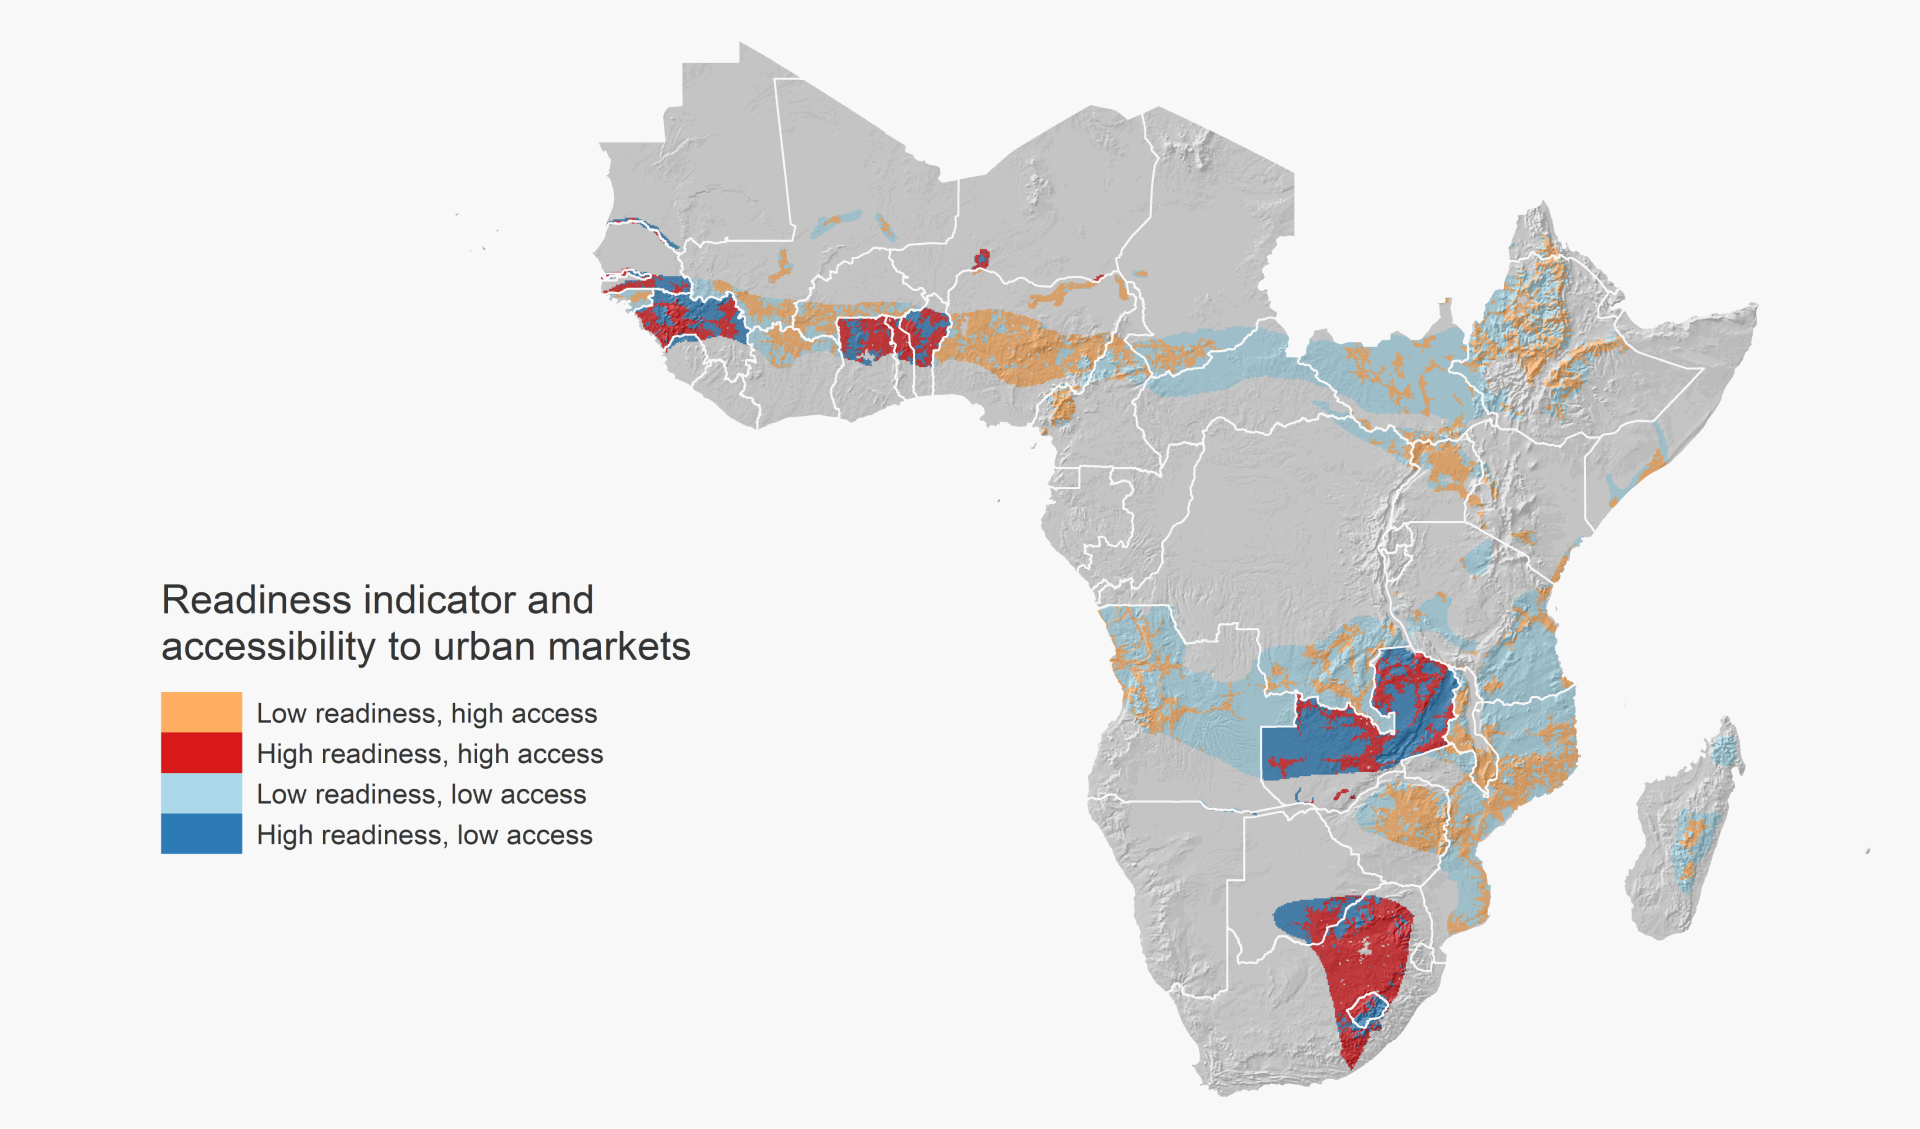 Data Insight 6, Map 1: Readiness indicator and accessibility to urban markets